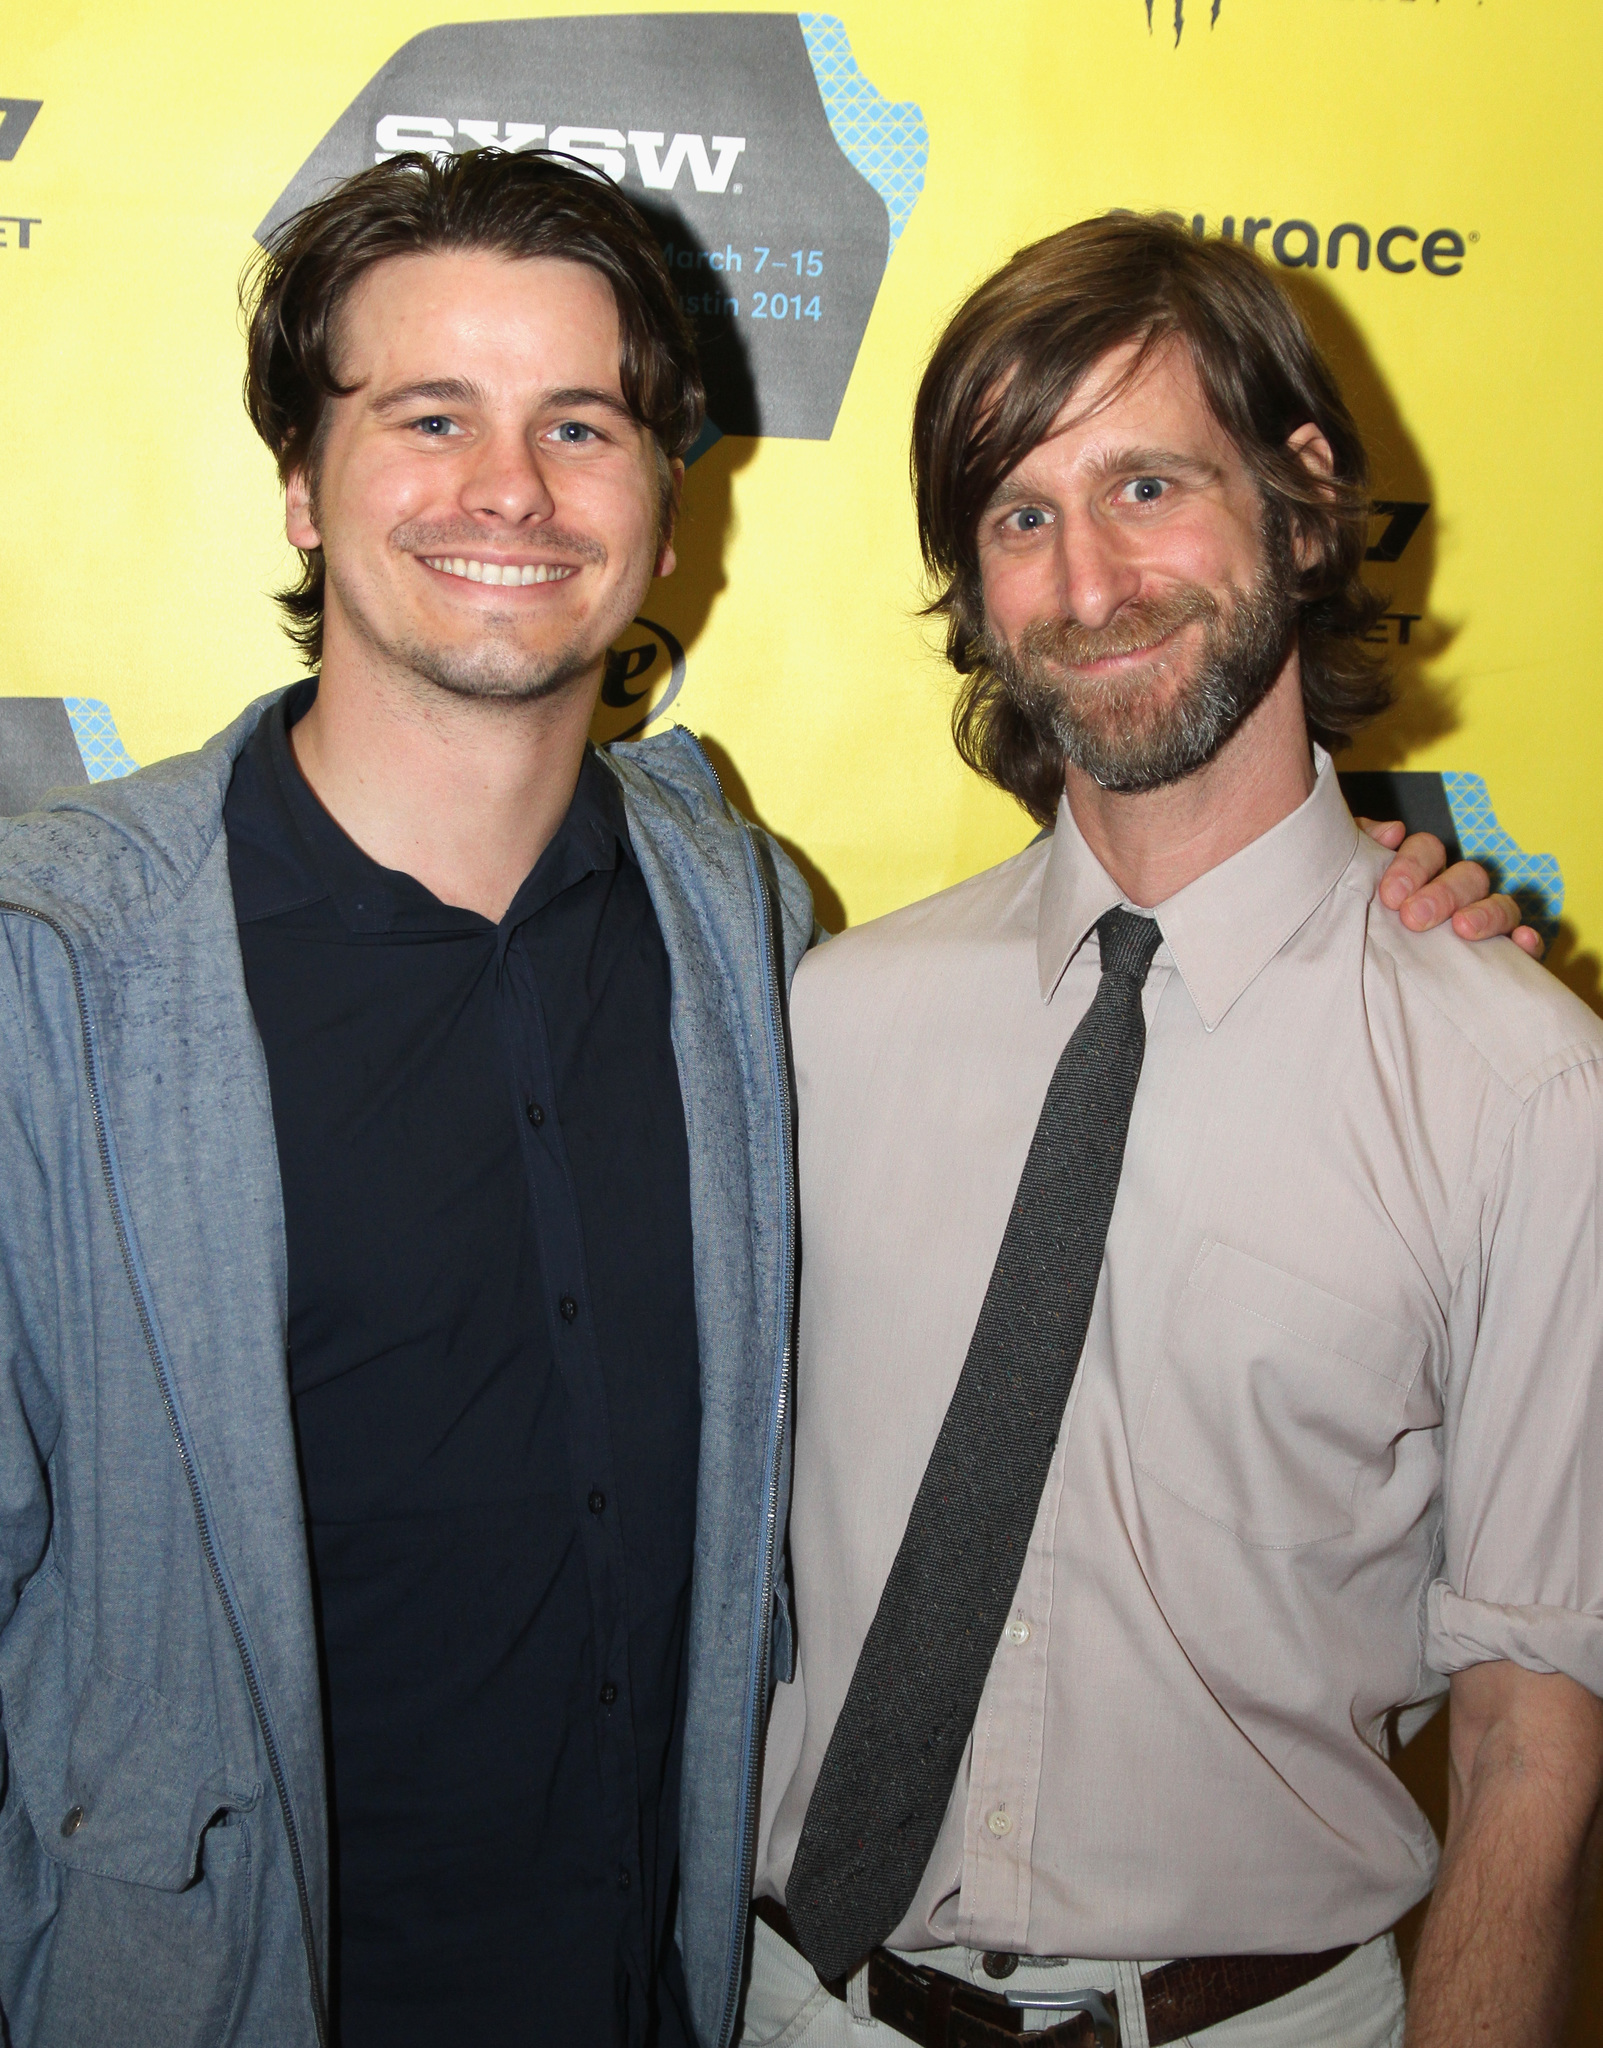 Michael Levine, Jason Ritter and Lawrence Michael Levine at event of Wild Canaries (2014)